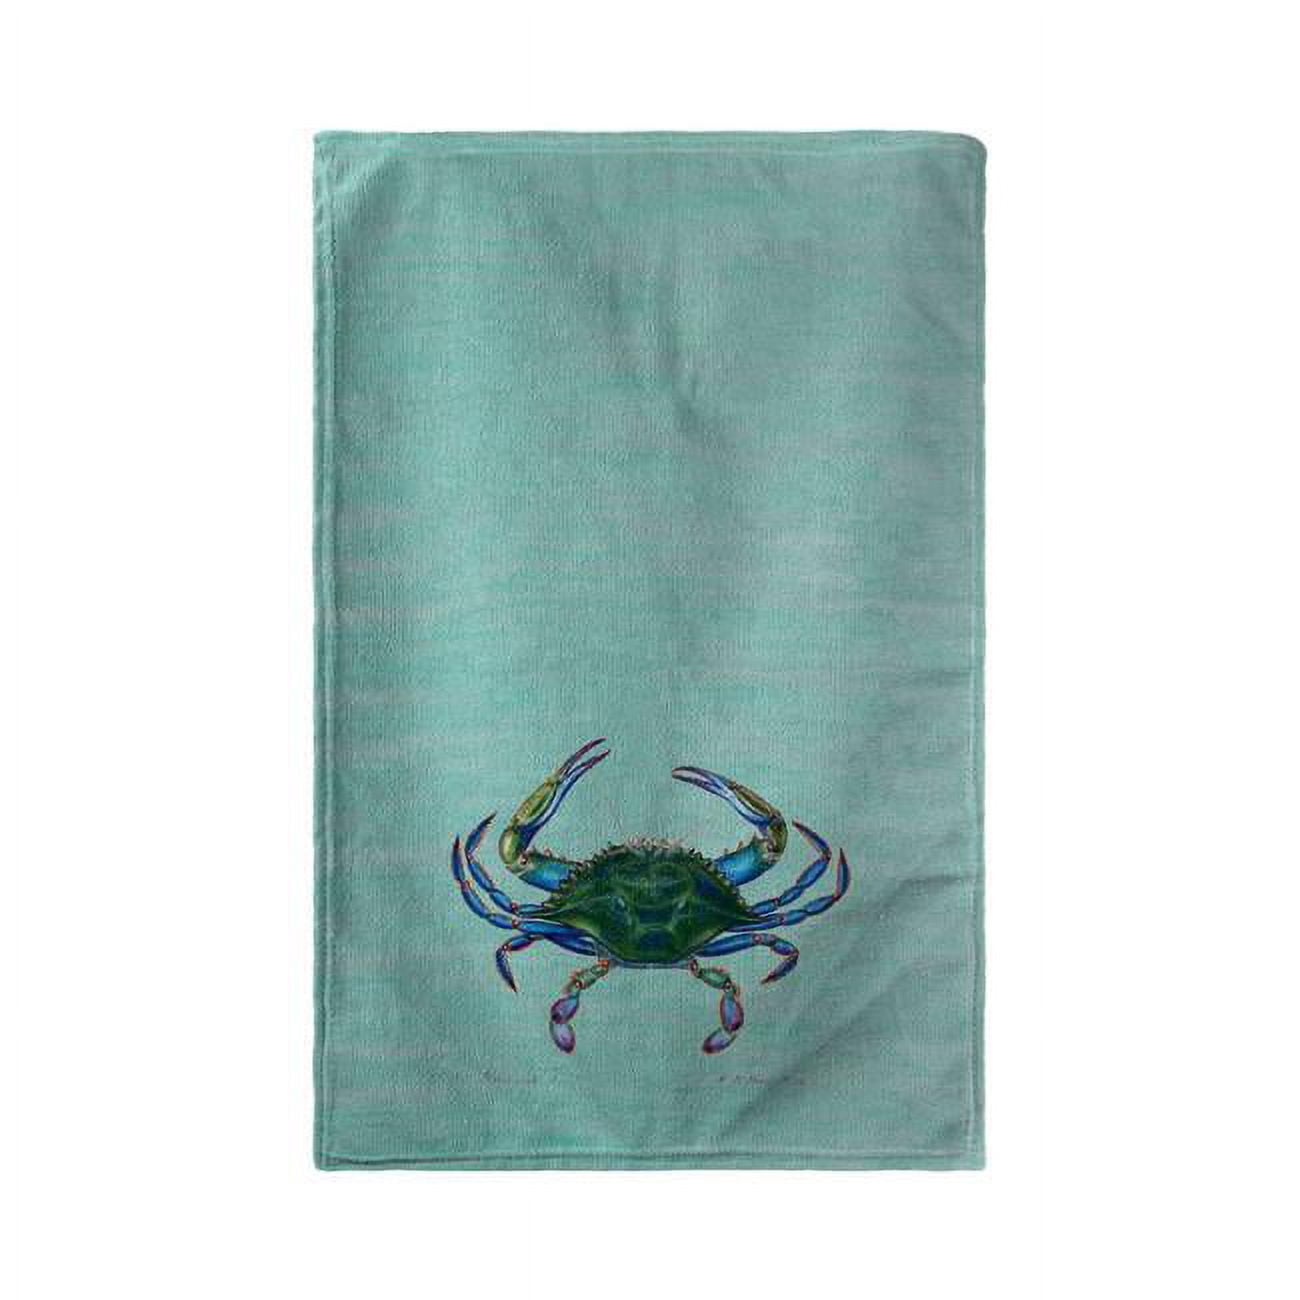 Bt005c Male Blue Crab On Teal Beach Towel - 30 X 50 In.